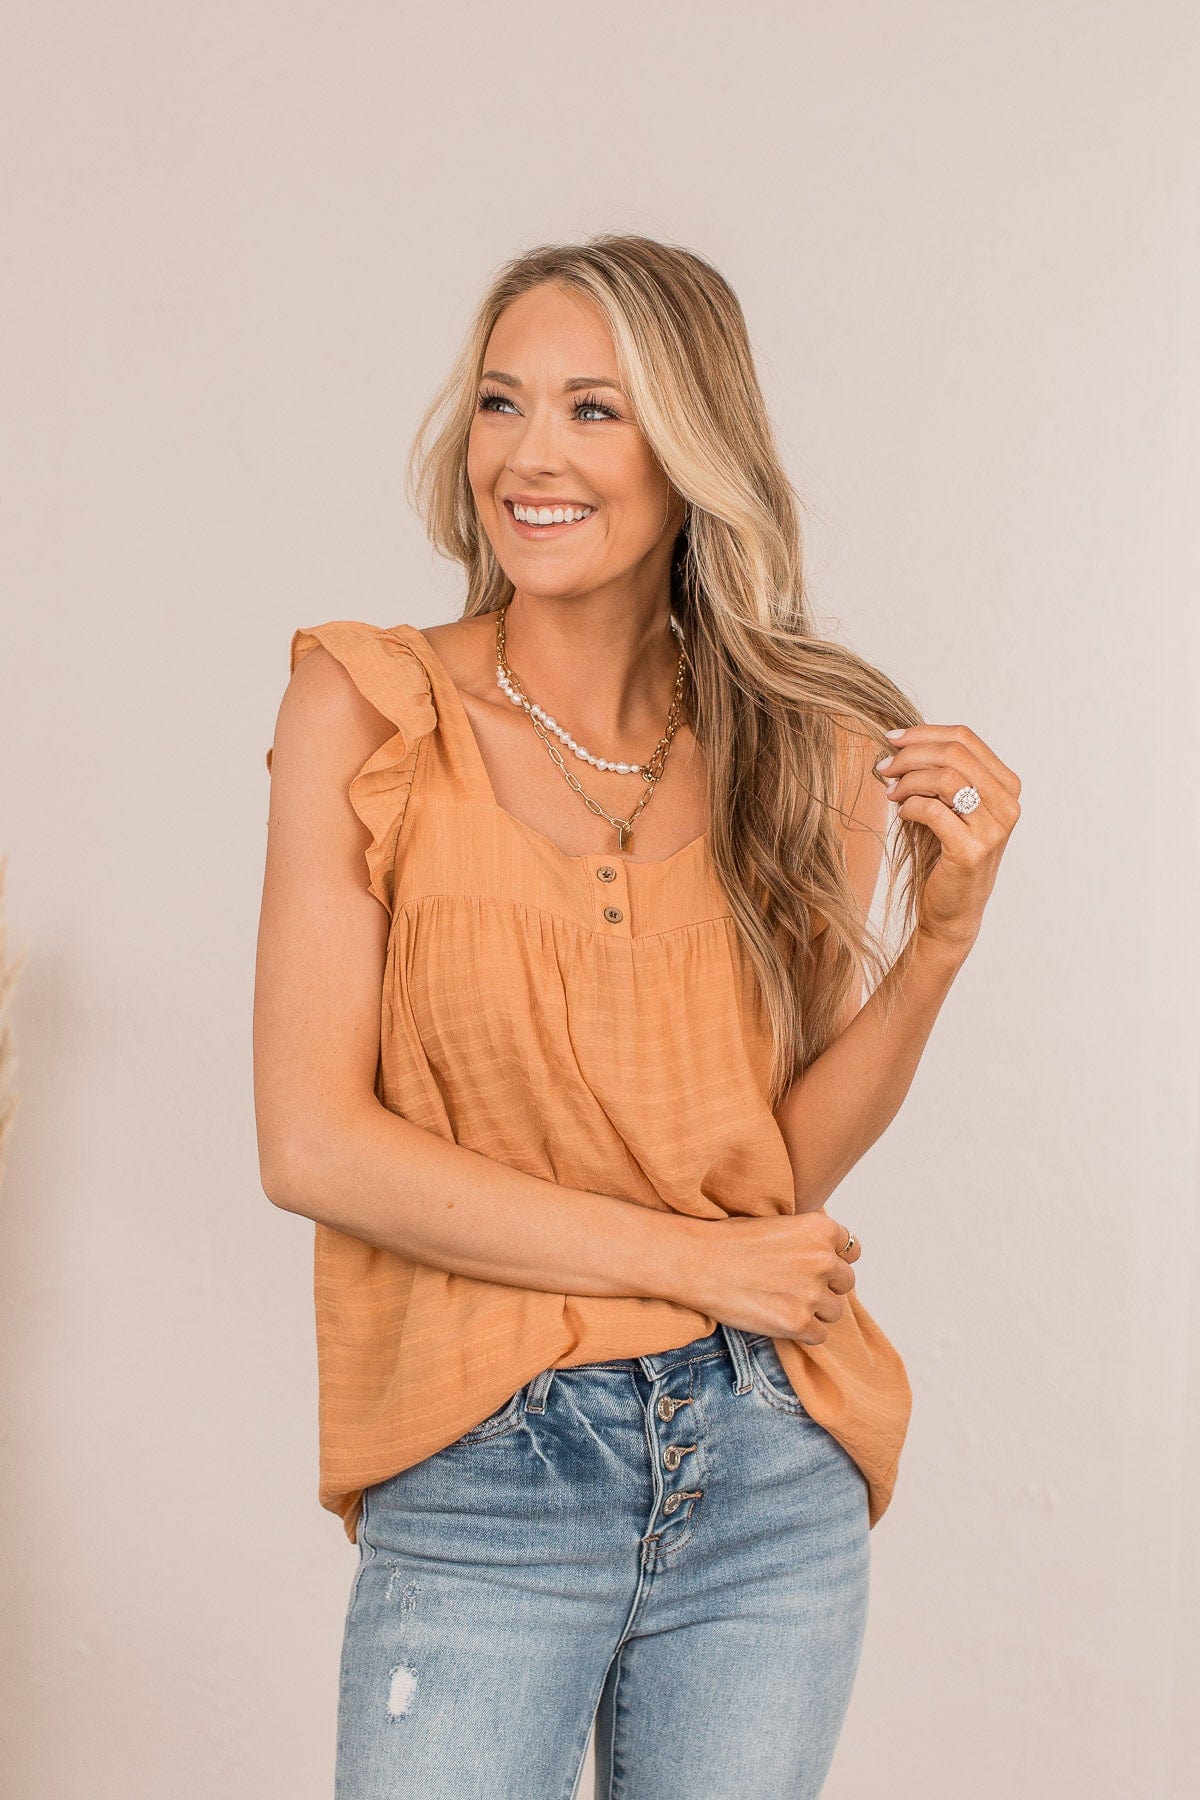 See Me Blush Flutter Sleeve Top- Apricot